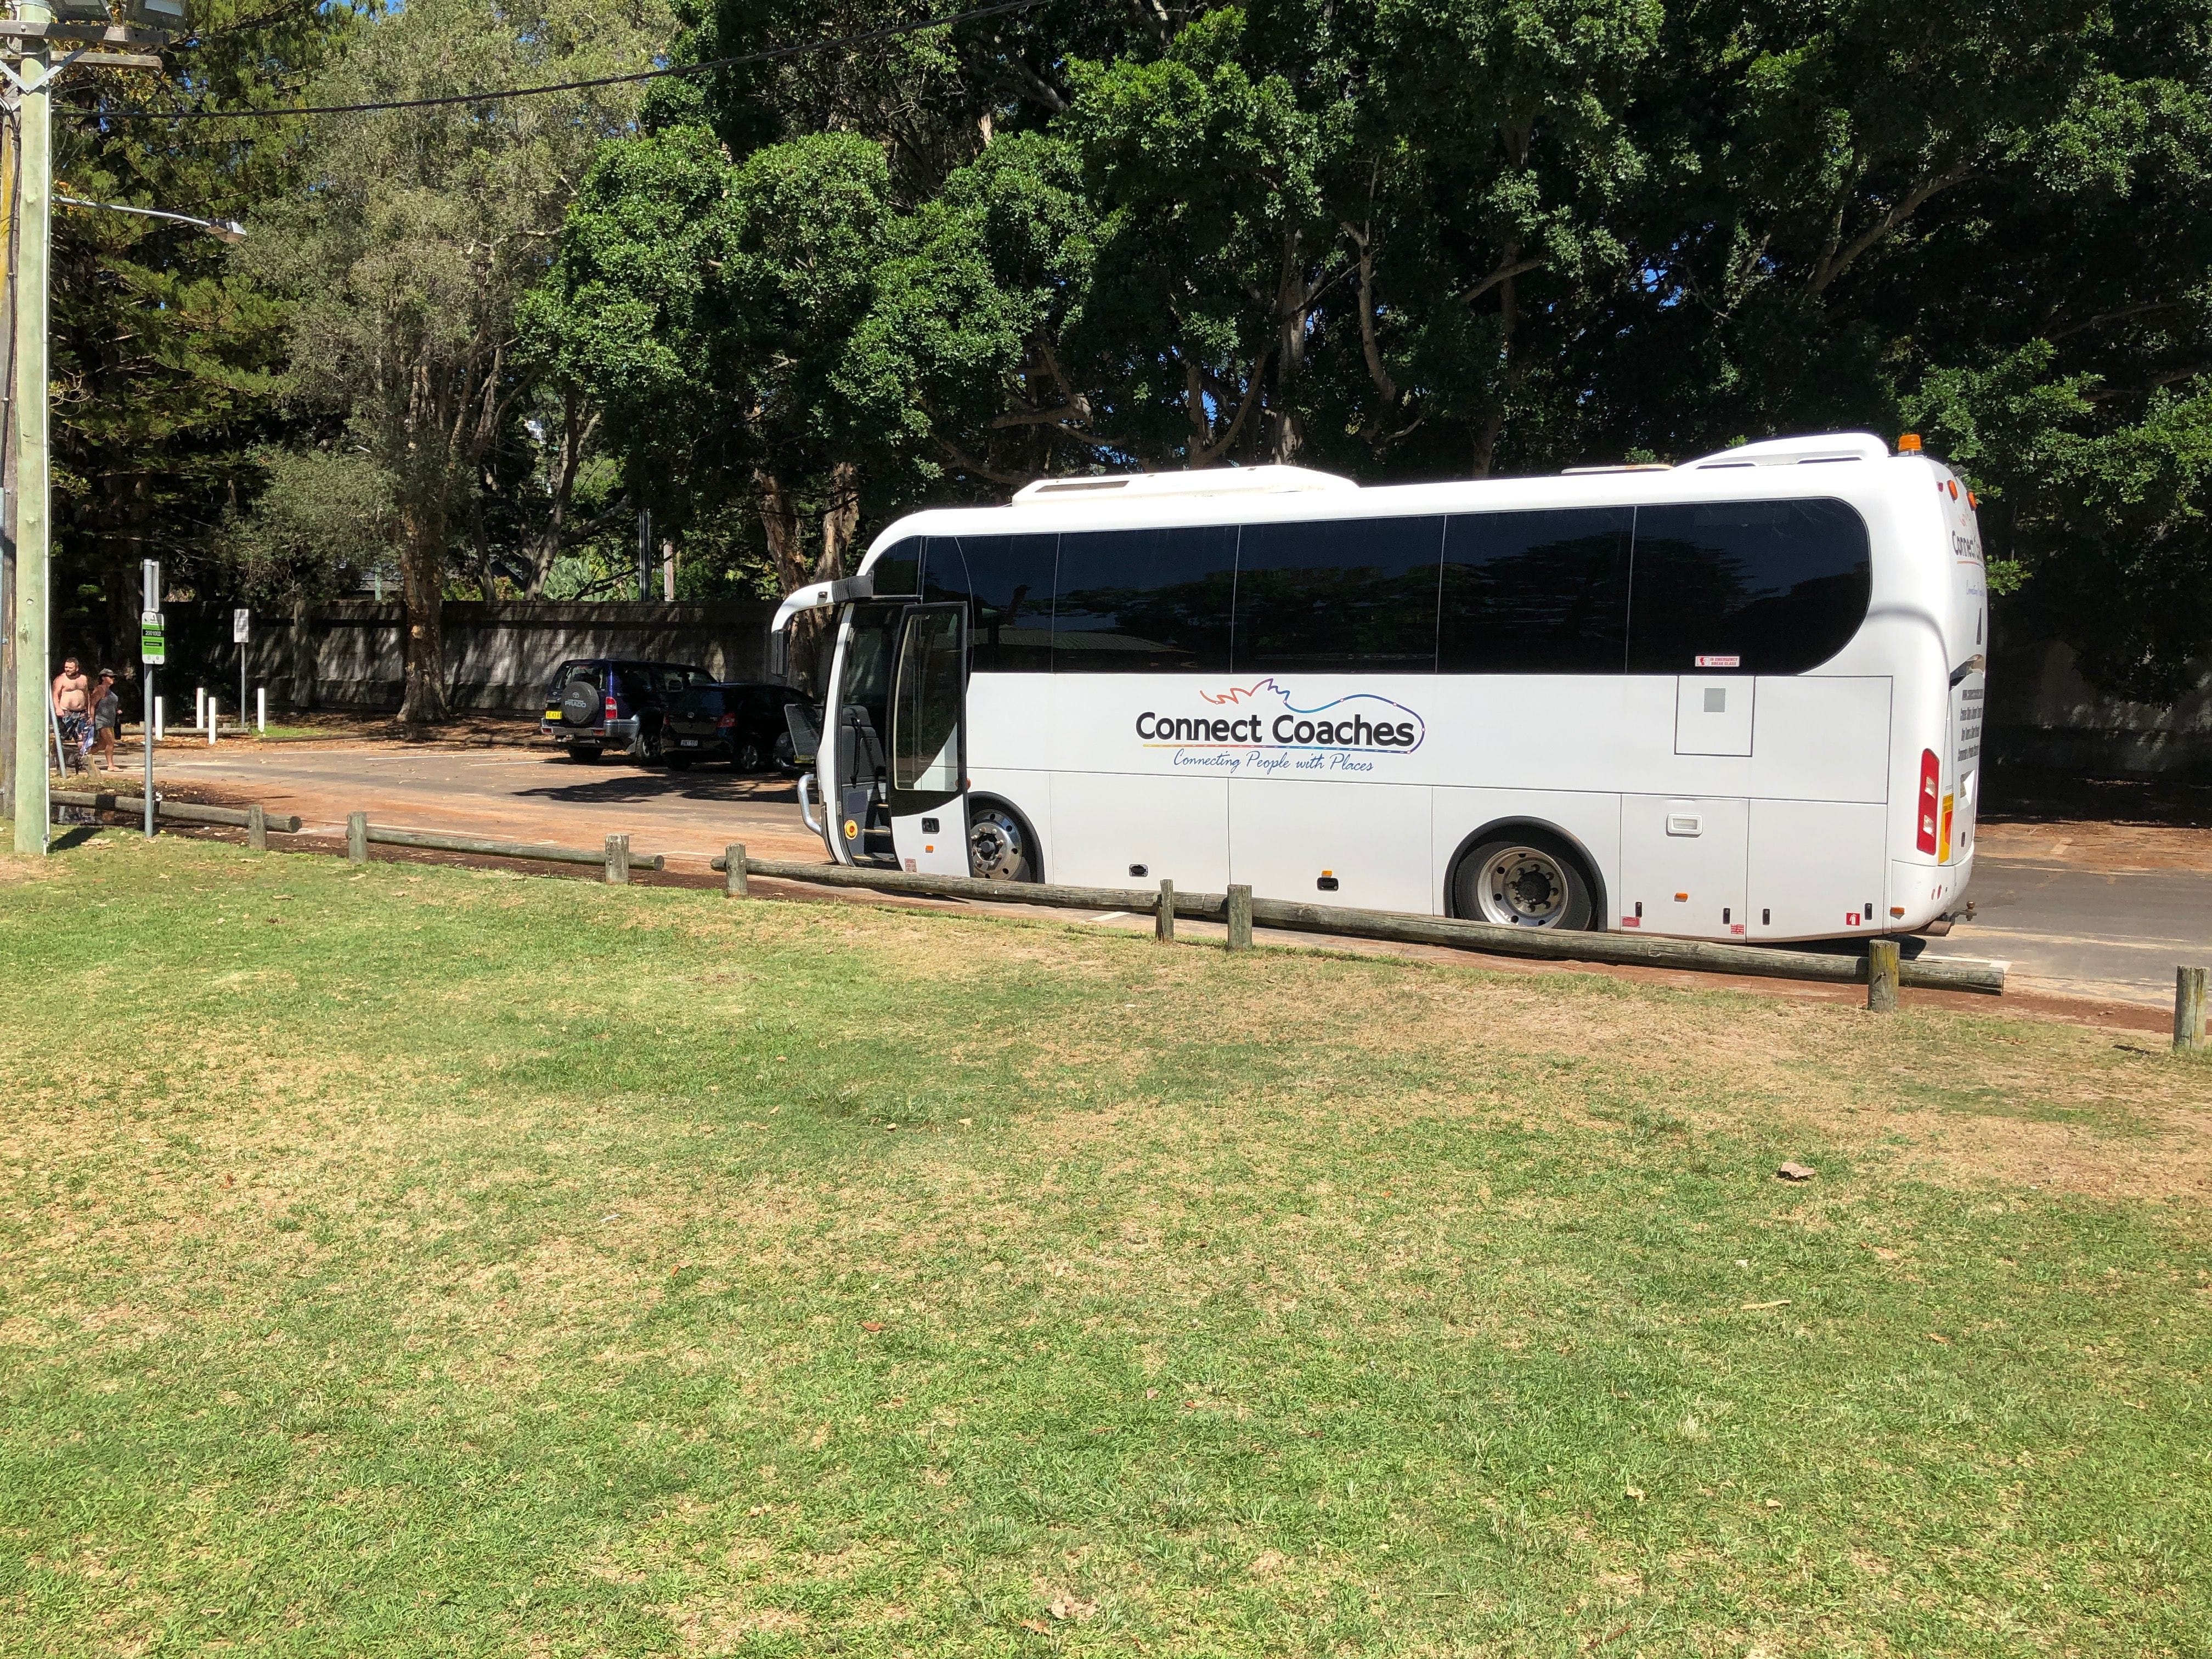 Northern Beaches Public Day Tour febuary 2019 Image -5c64963db4efe